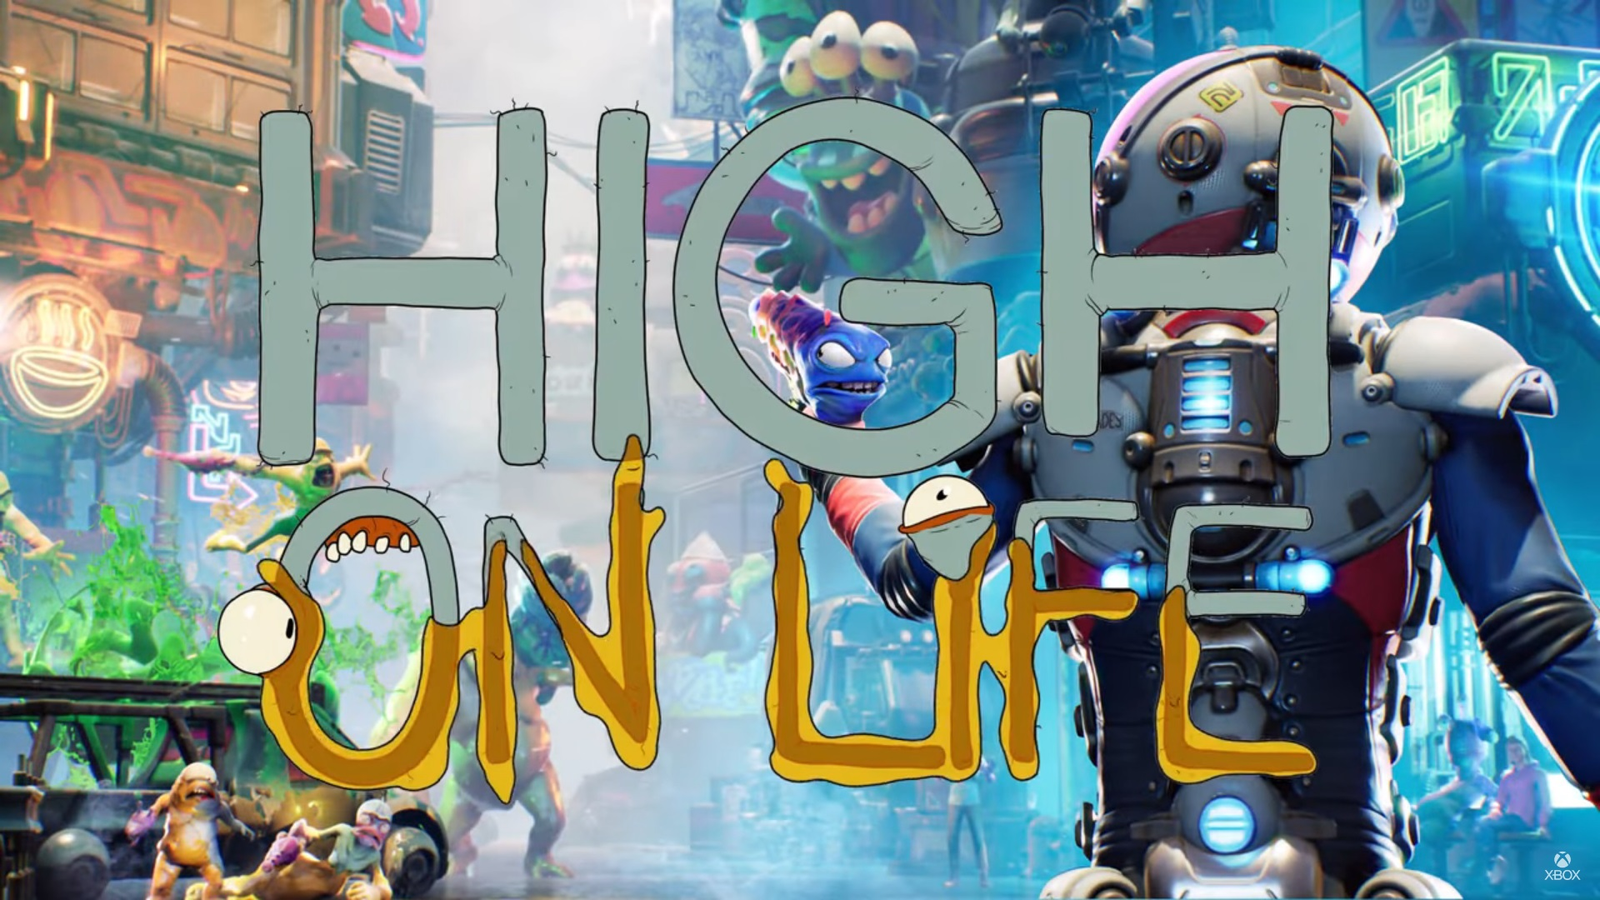 High on Life Review - Gamereactor